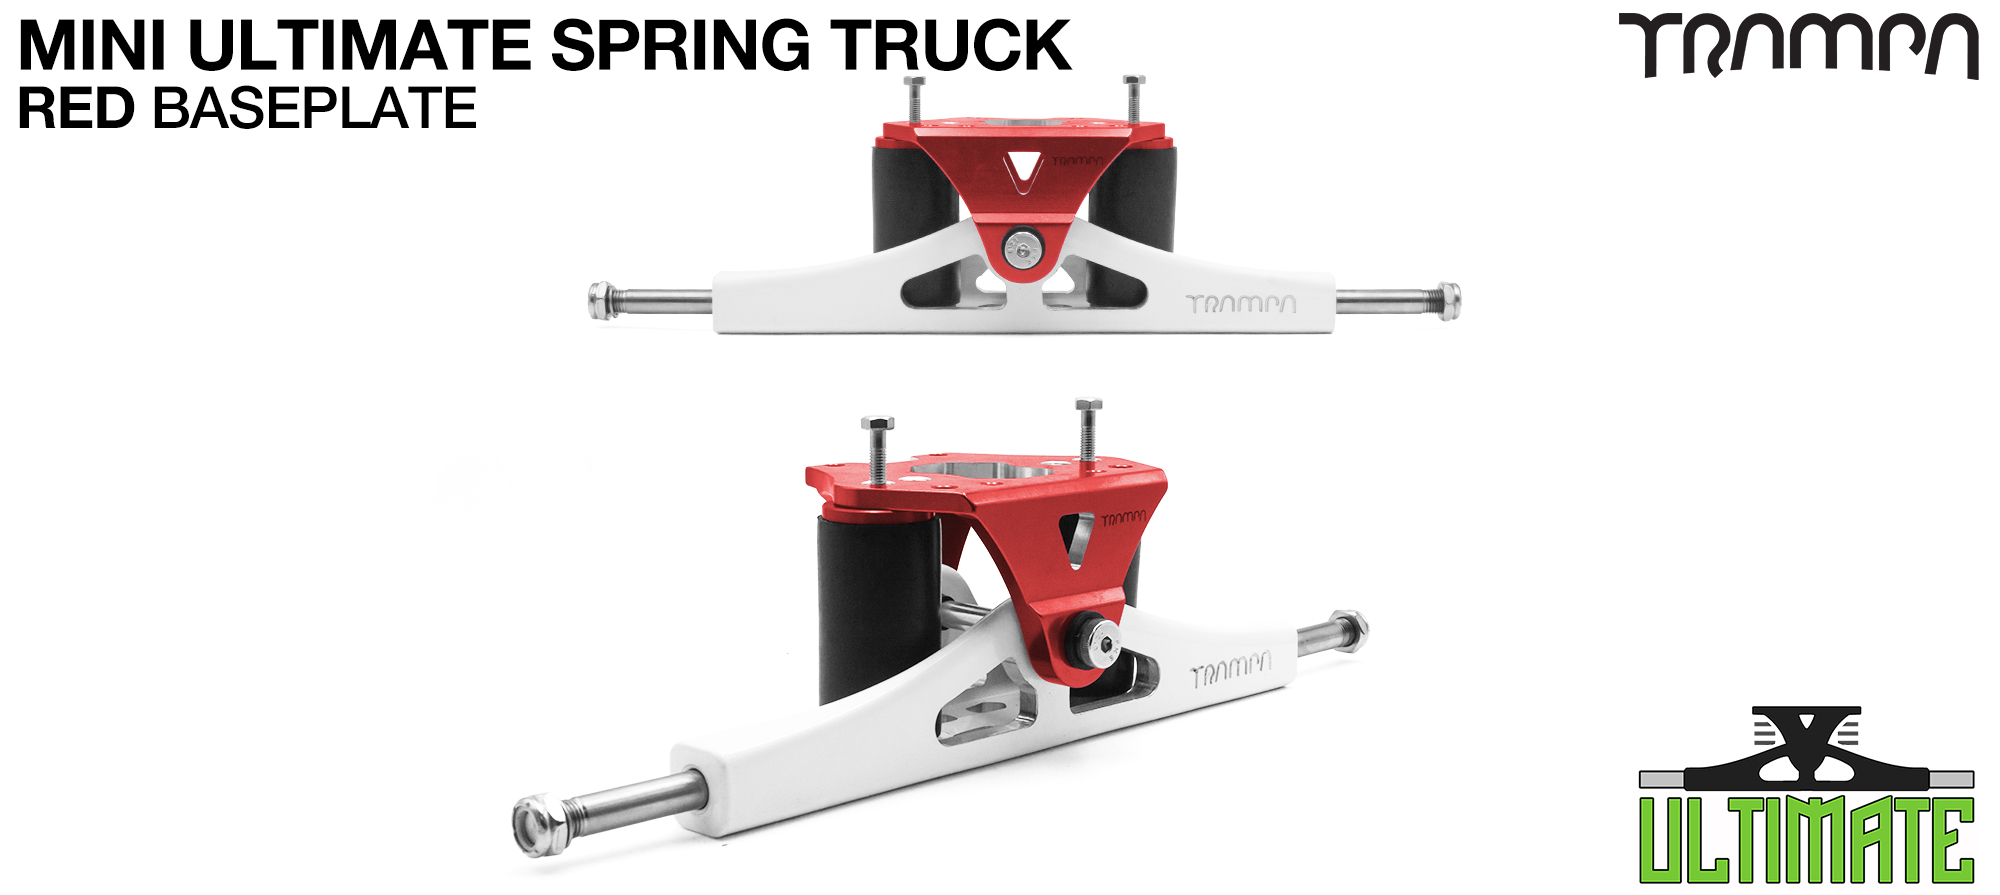 Mini ULTIMATE TRAMPA TRUCKS - CNC FORGED Channel Hanger with 9.525mm TITANIUM Axle CNC Baseplate TITANIUM Kingpin - RED